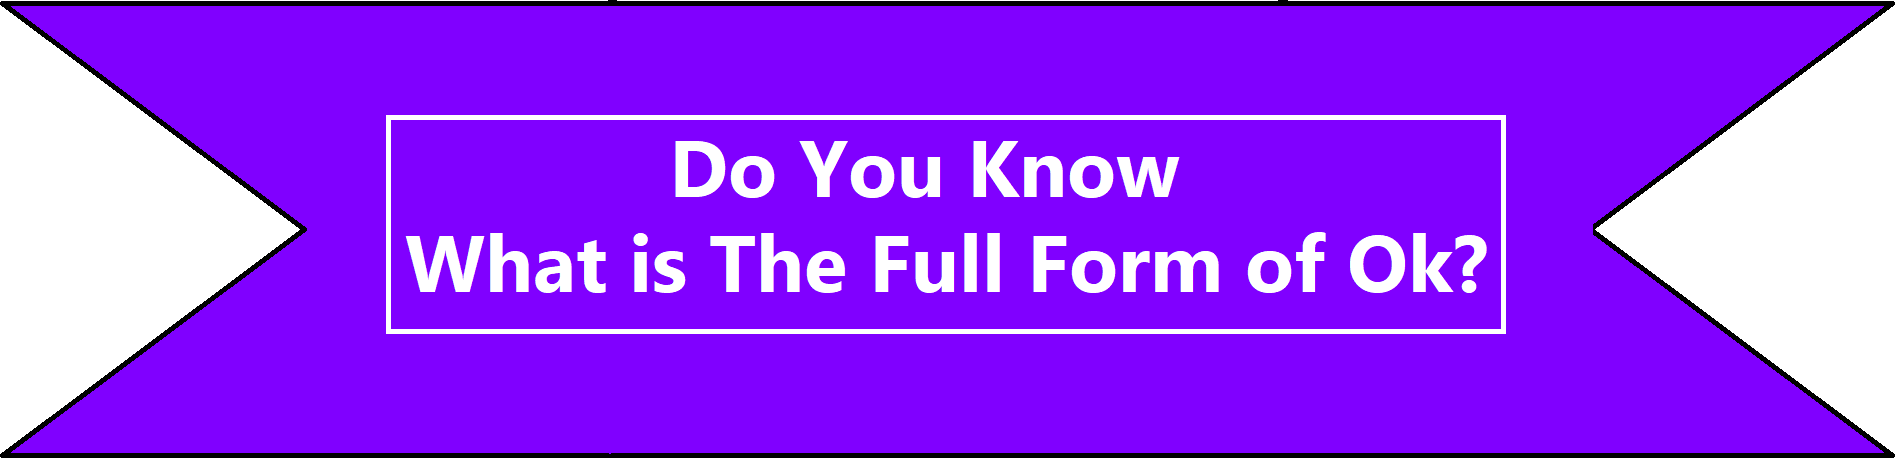 OK Full Form: What Is the Full-Form of OK?